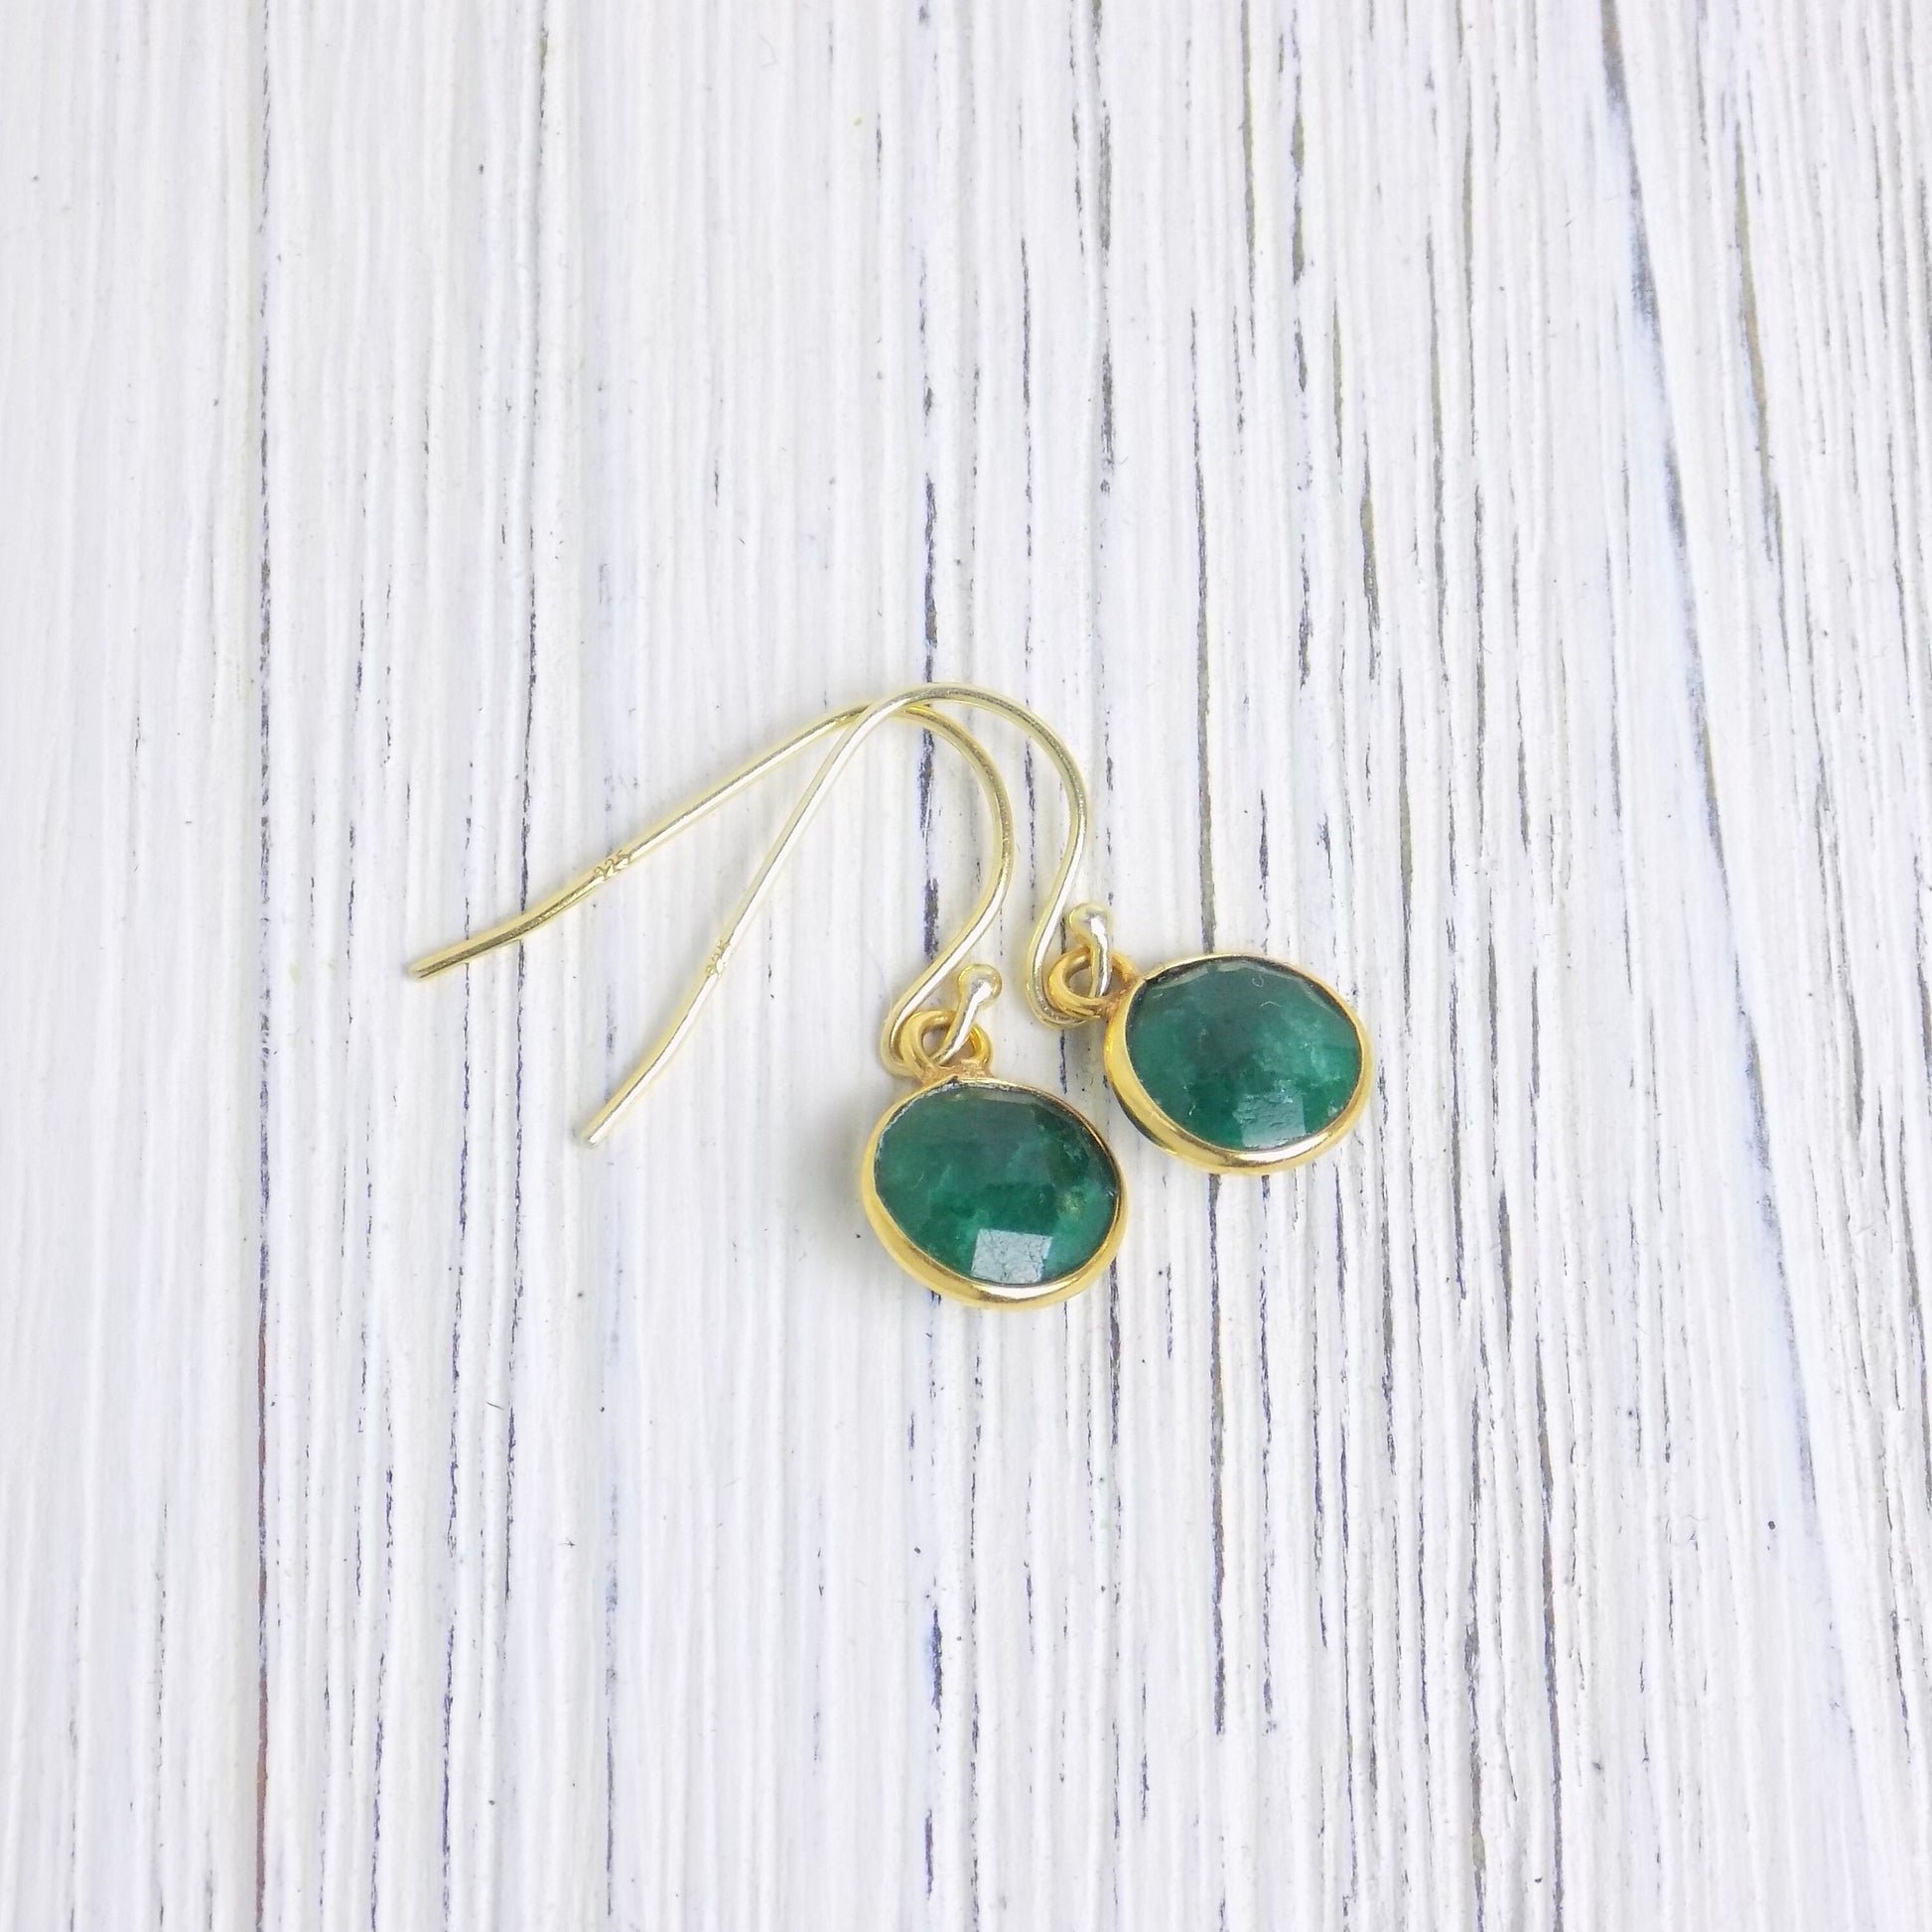 Tiny Green Emerald Earrings Gold, Round Dainty Raw Emerald Dangle Earring, Small Crystal Drop, Christmas Gift For Wife, M6-14